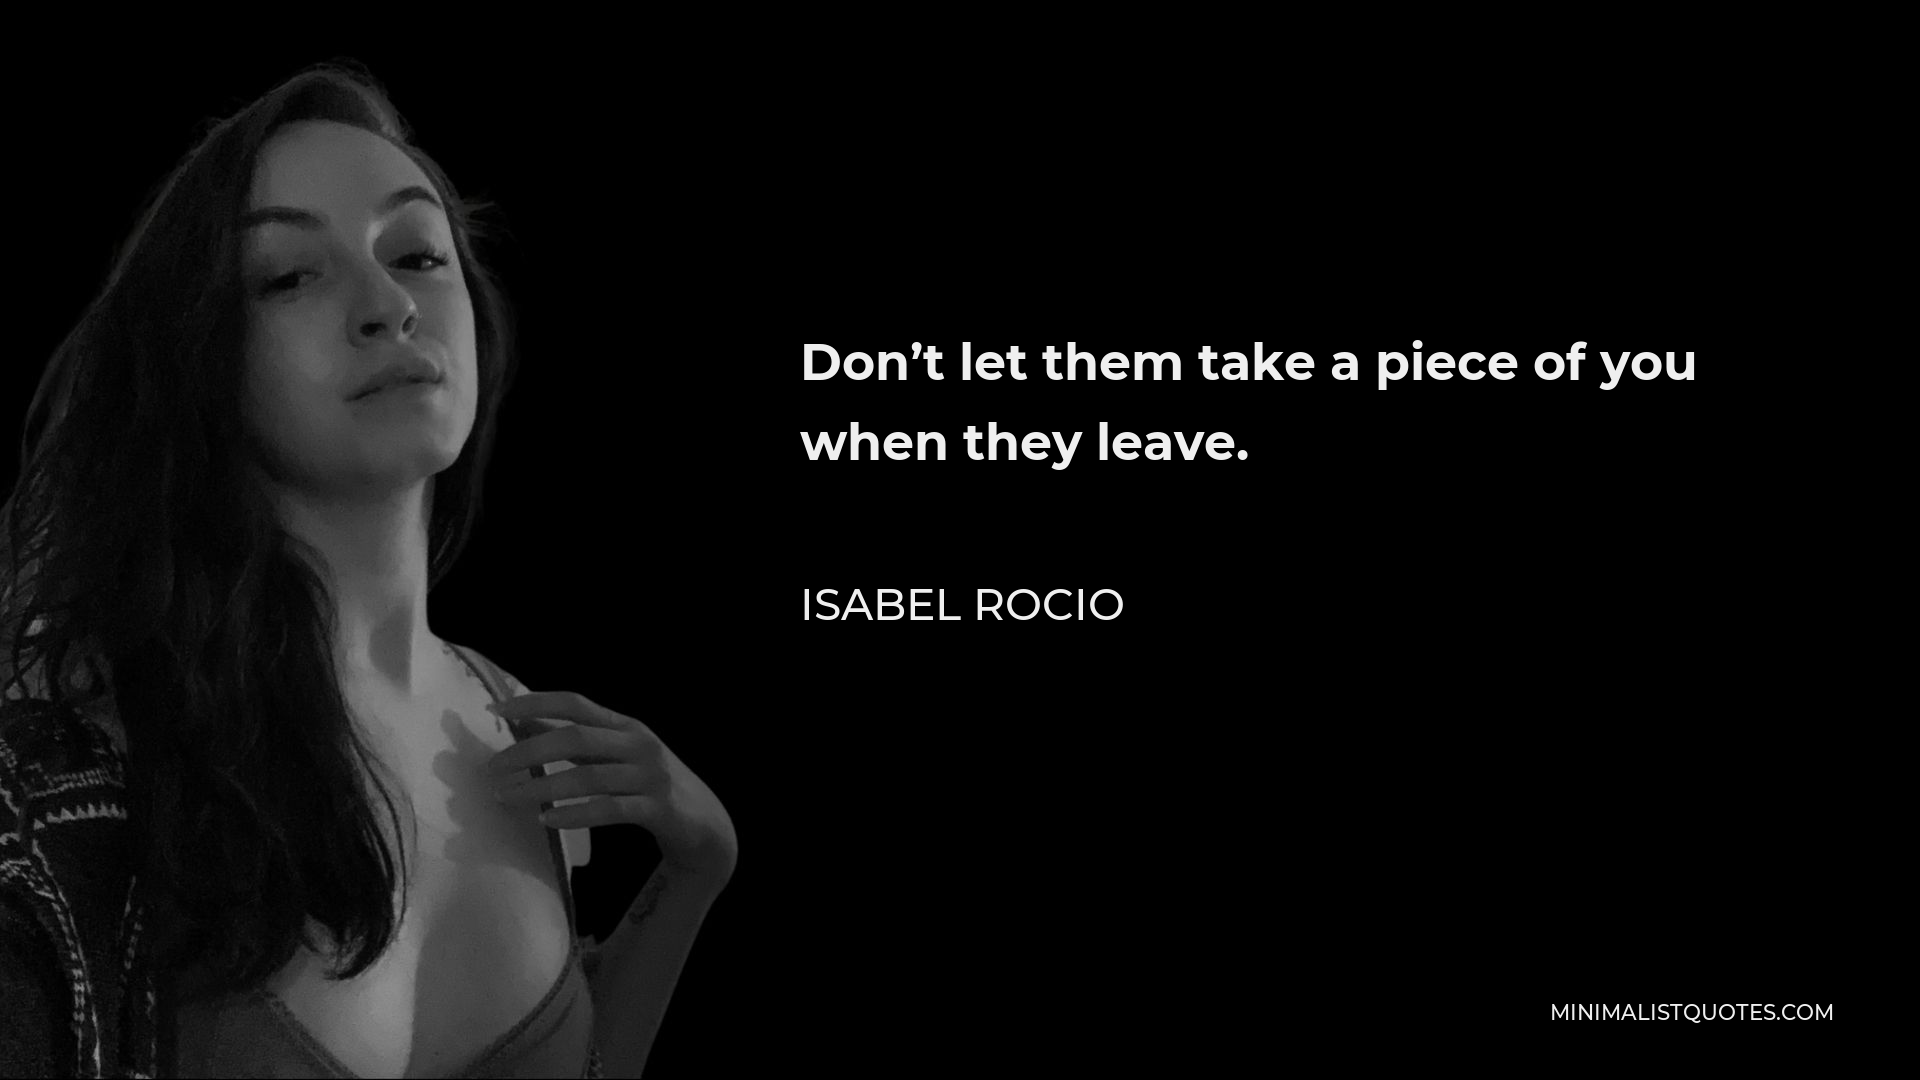 Isabel Rocio Quote - Don’t let them take a piece of you when they leave.